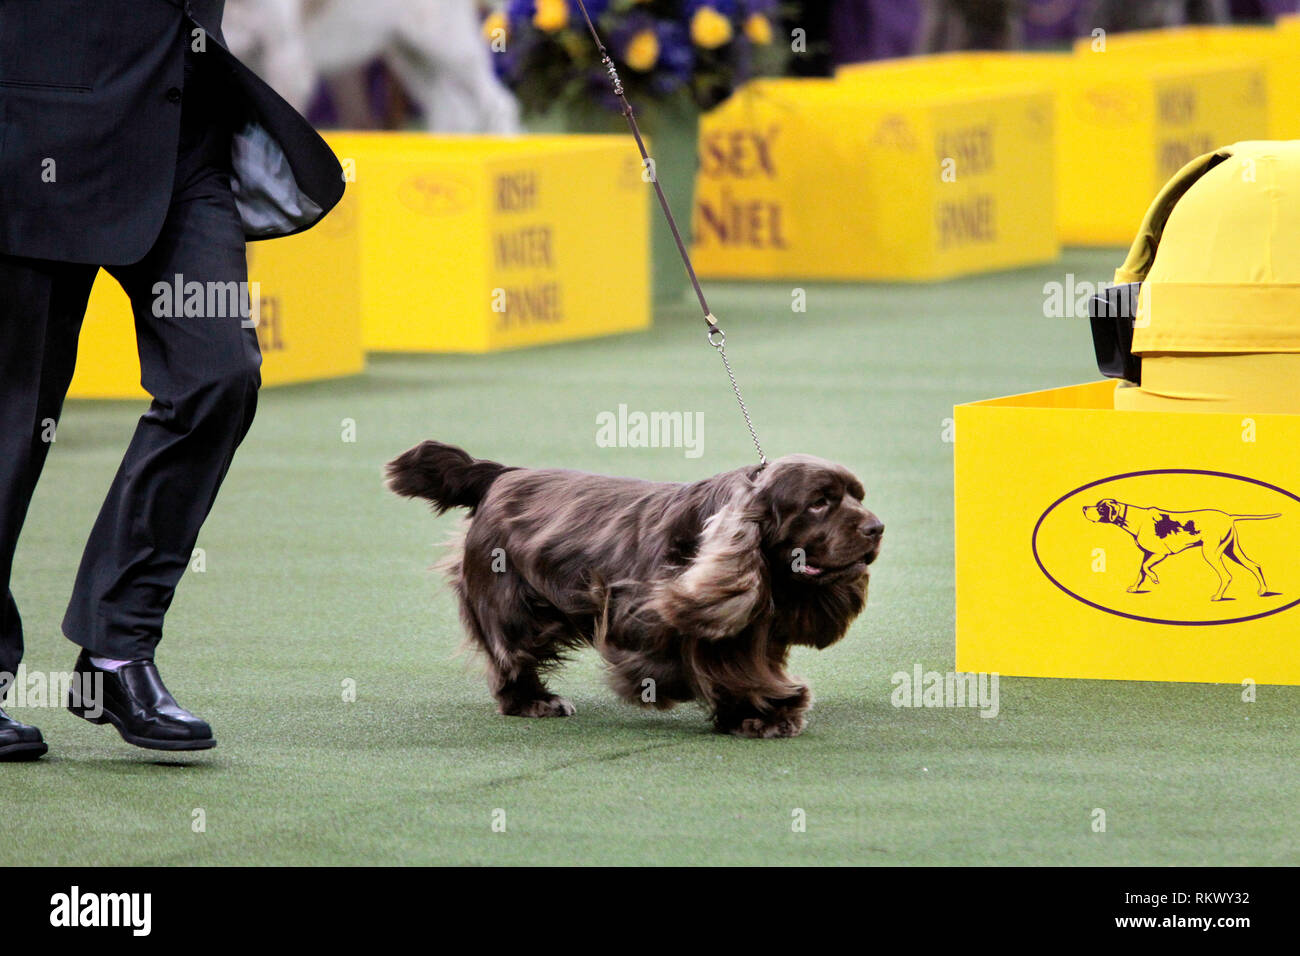 New York, USA. 12th Feb 2019. Westminster Dog Show - New York City, 12 February, 2019:  Sussex Spaniel GCH CH Kamand's Full of Beans, or Bean for short, with his handler after winning the Sporting Group at the 143rd Annual Westminster Dog Show, Tuesday evening at Madison Square Garden in New York City.  It was the second straight year he won the group. Credit: Adam Stoltman/Alamy Live News Stock Photo